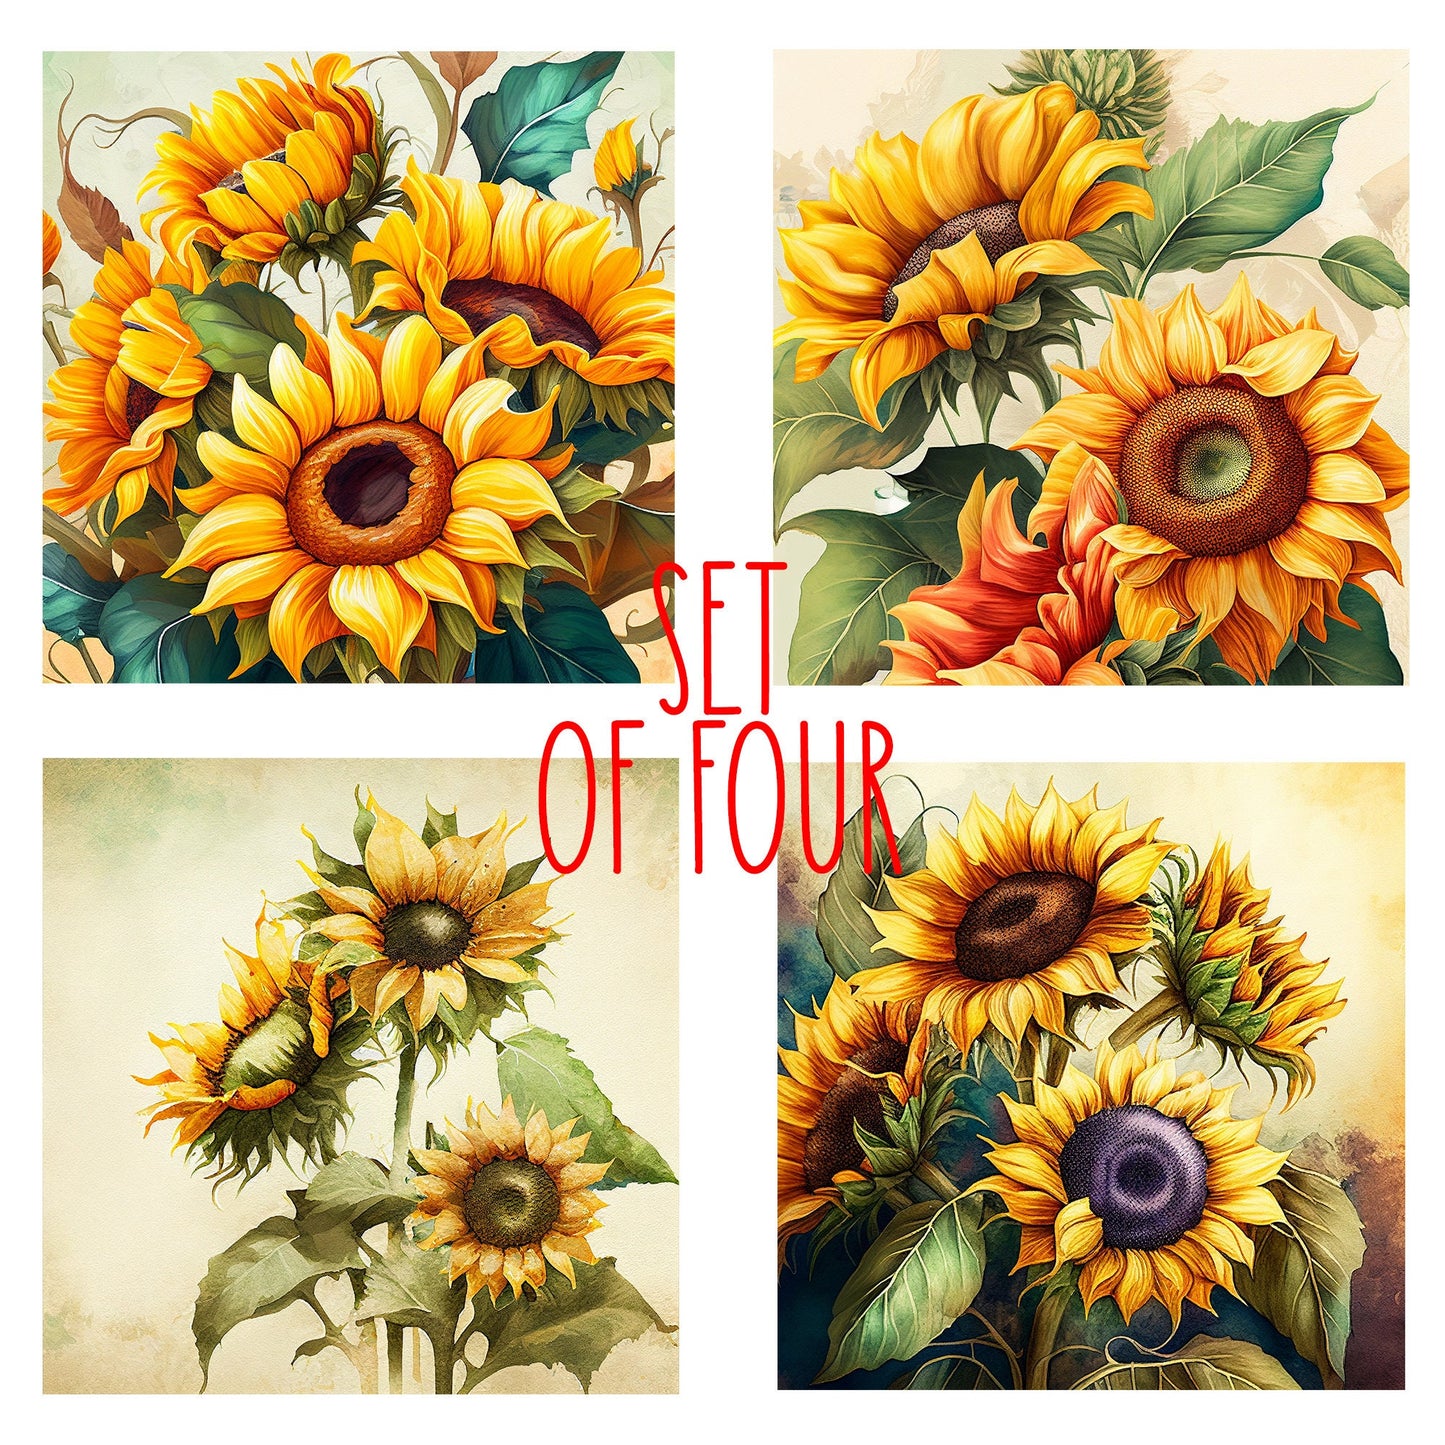 Sunflowers Art Decorative Ceramic Tile Set with Optional Easel Back - Available in 4 sizes - Set of 4